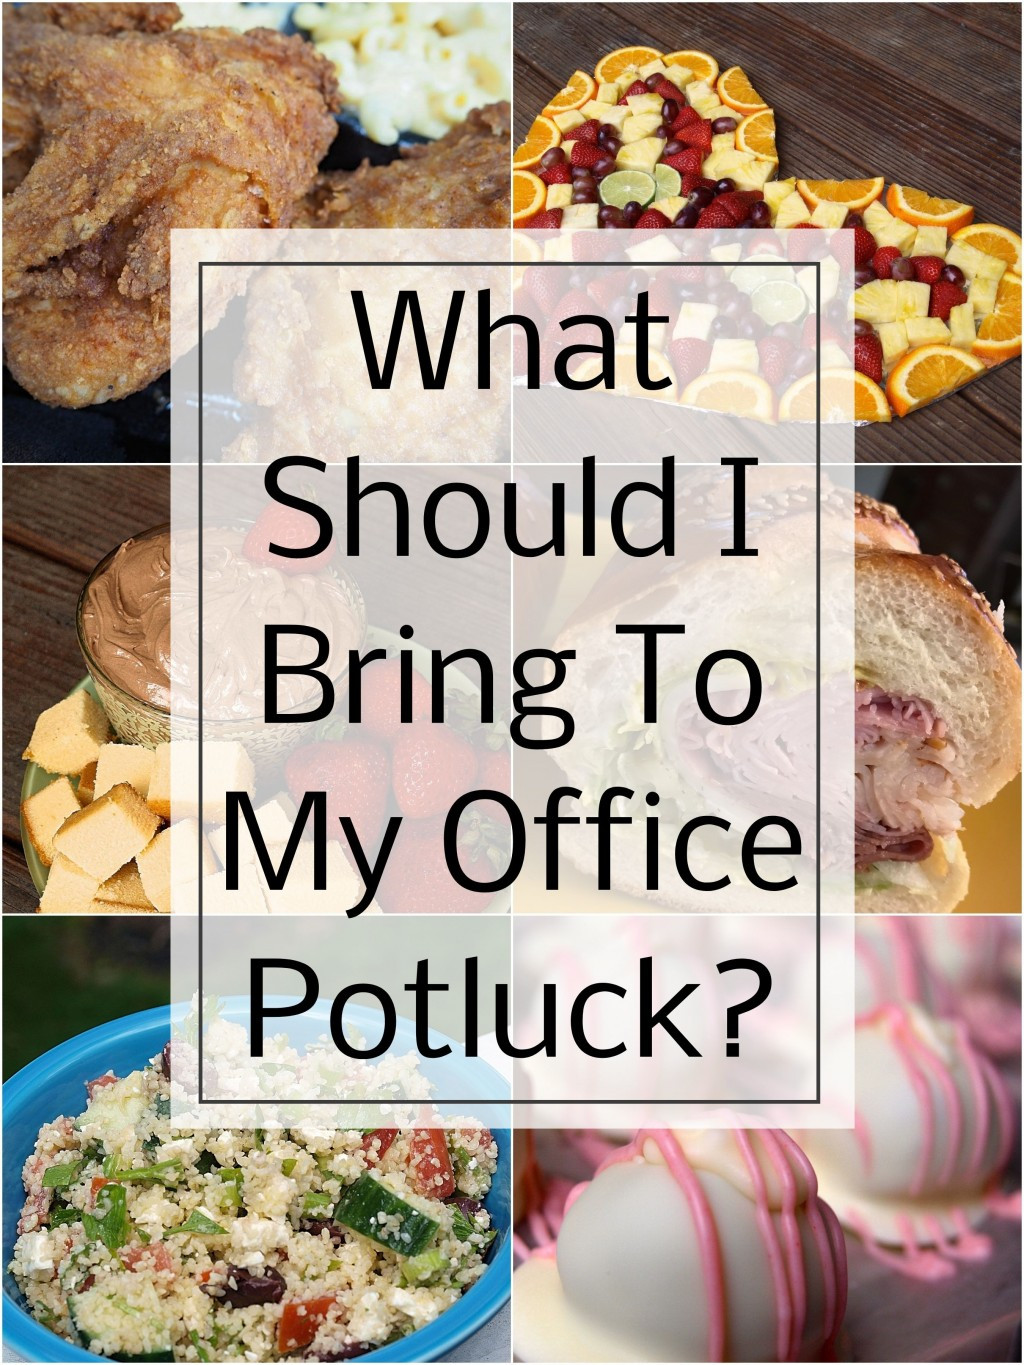 Food Ideas To Bring To A Party
 What Are the Best Dishes to Bring to an fice Potluck